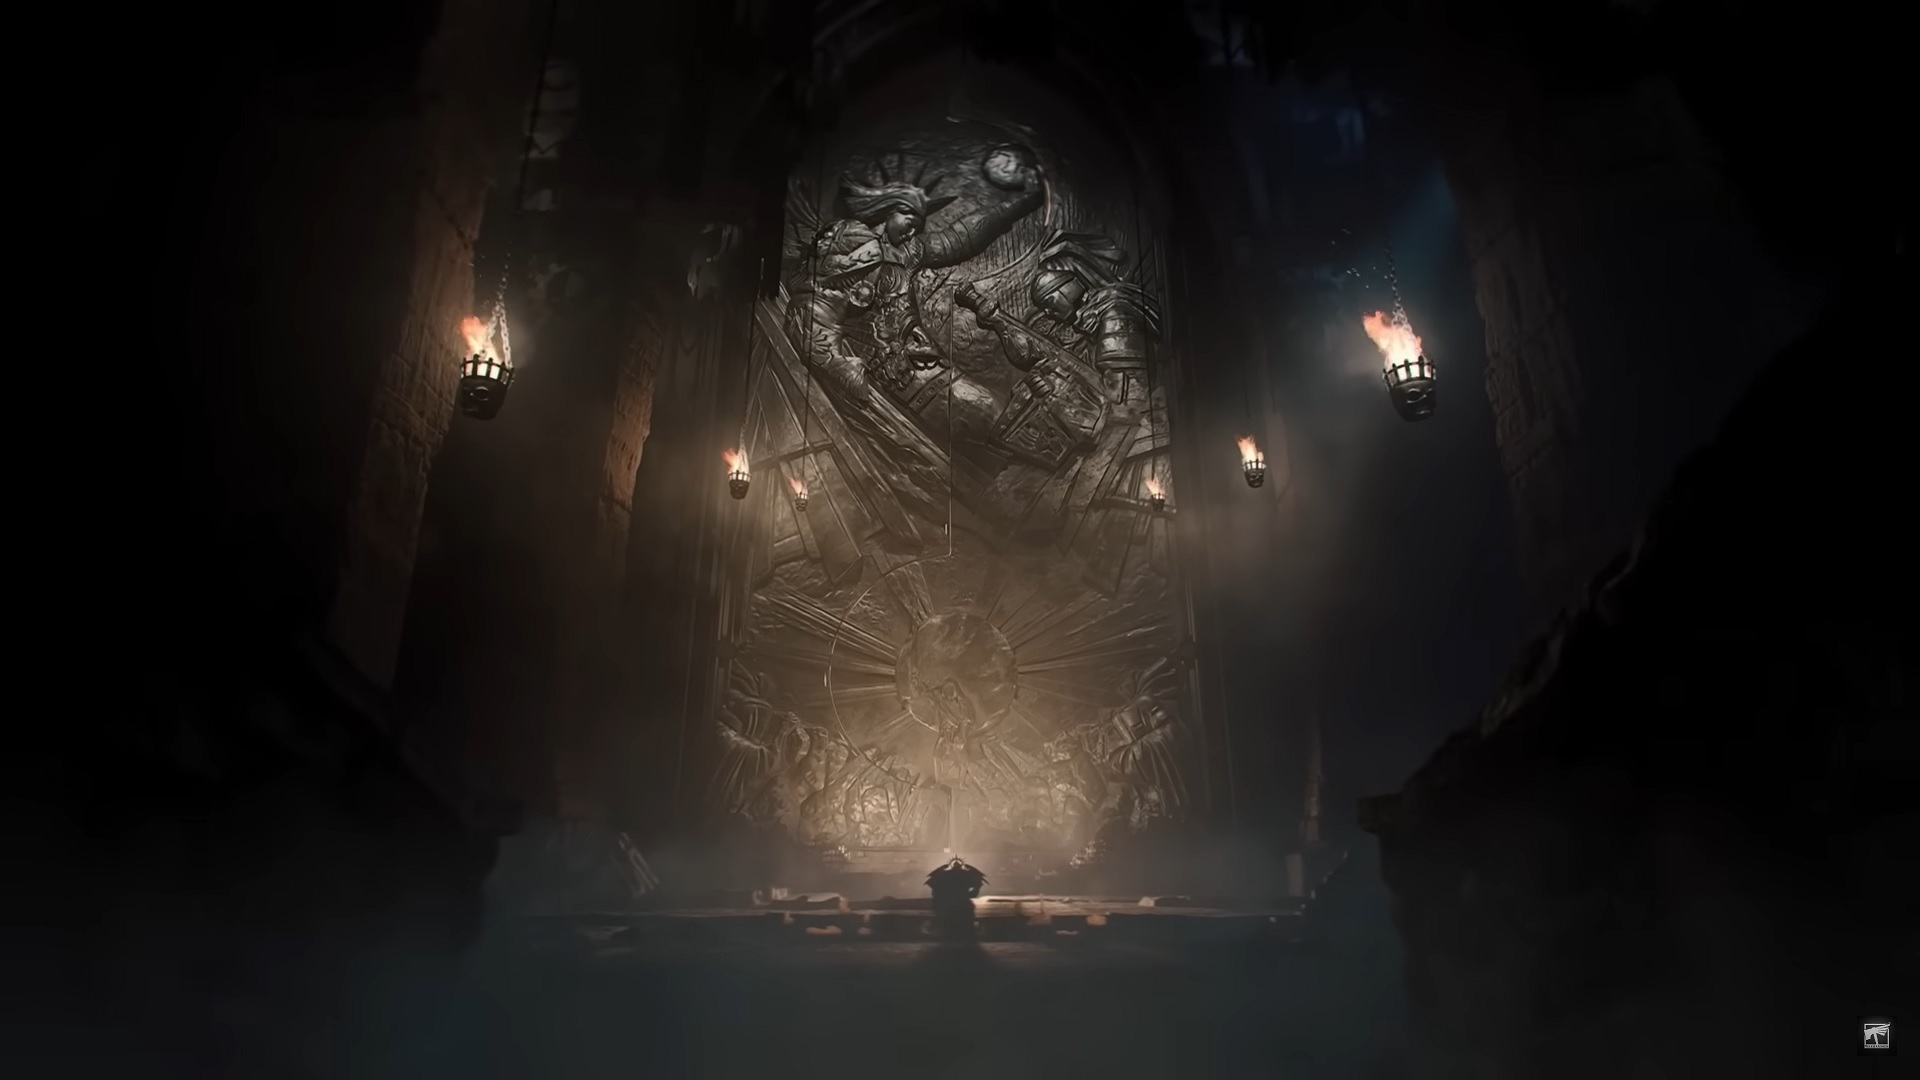 Roboute kneels before the grave of his brother in the opening of the Warhammer 40K 10th edition reveal trailer.